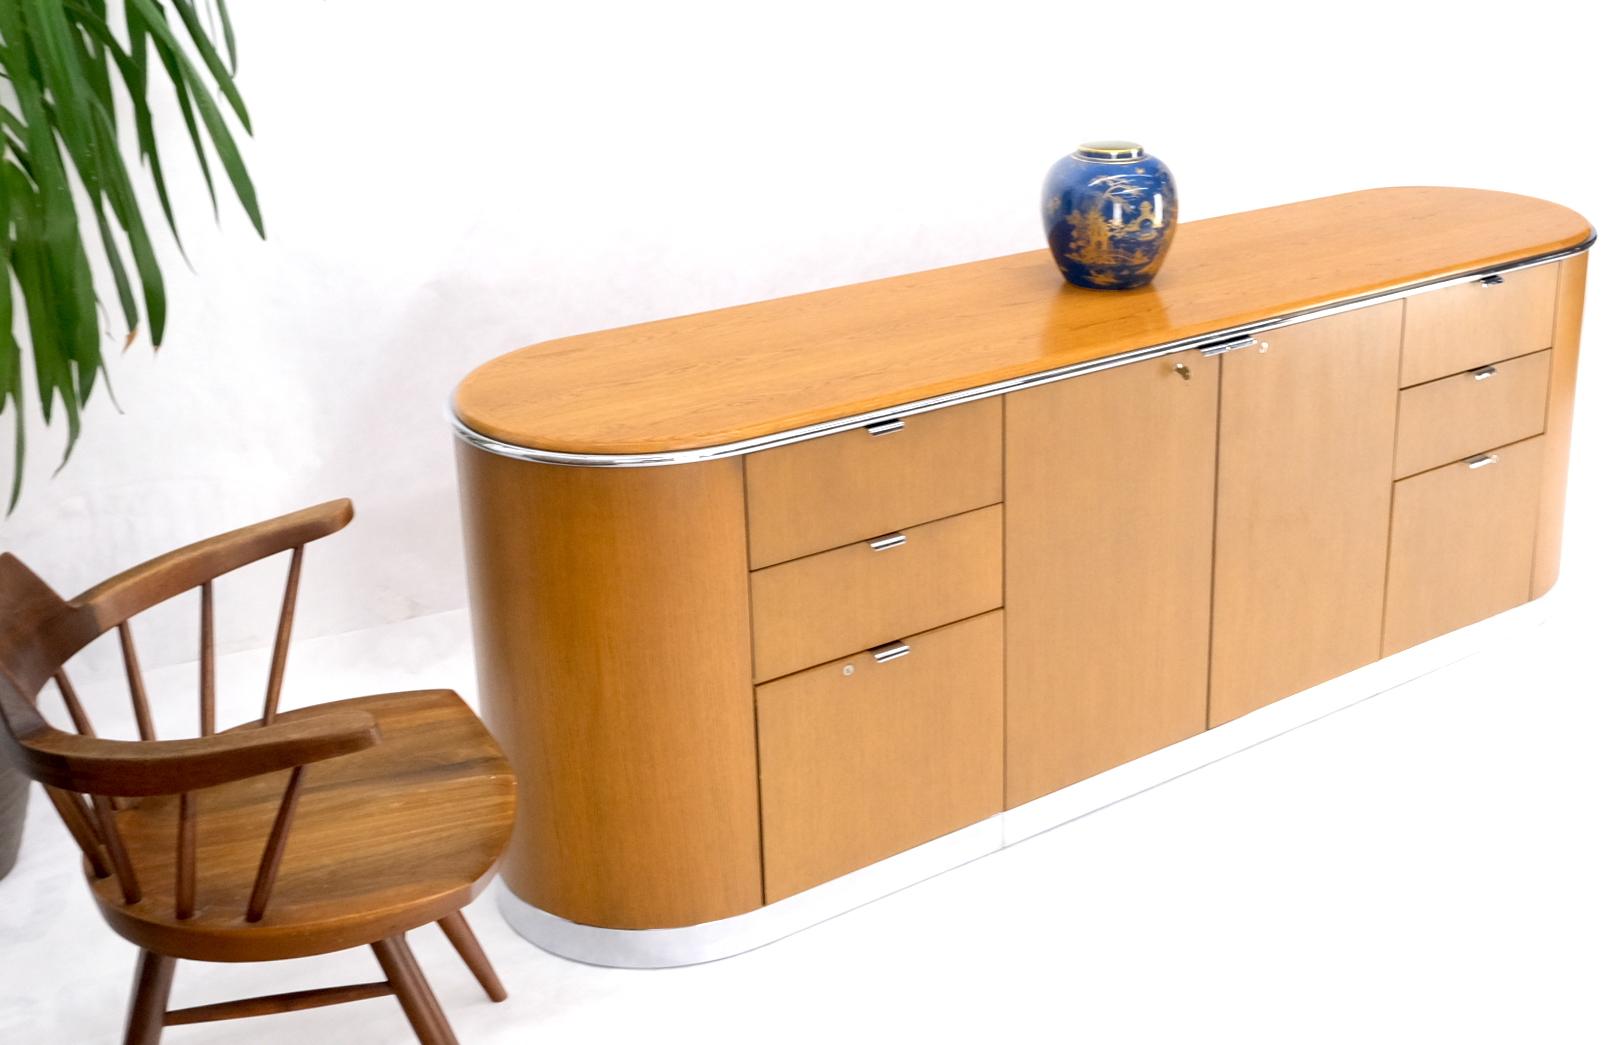 Rare Mid-Century Modern long credenza with rounded drum shape ends credenza dresser by Thonet. Comes with the working key.